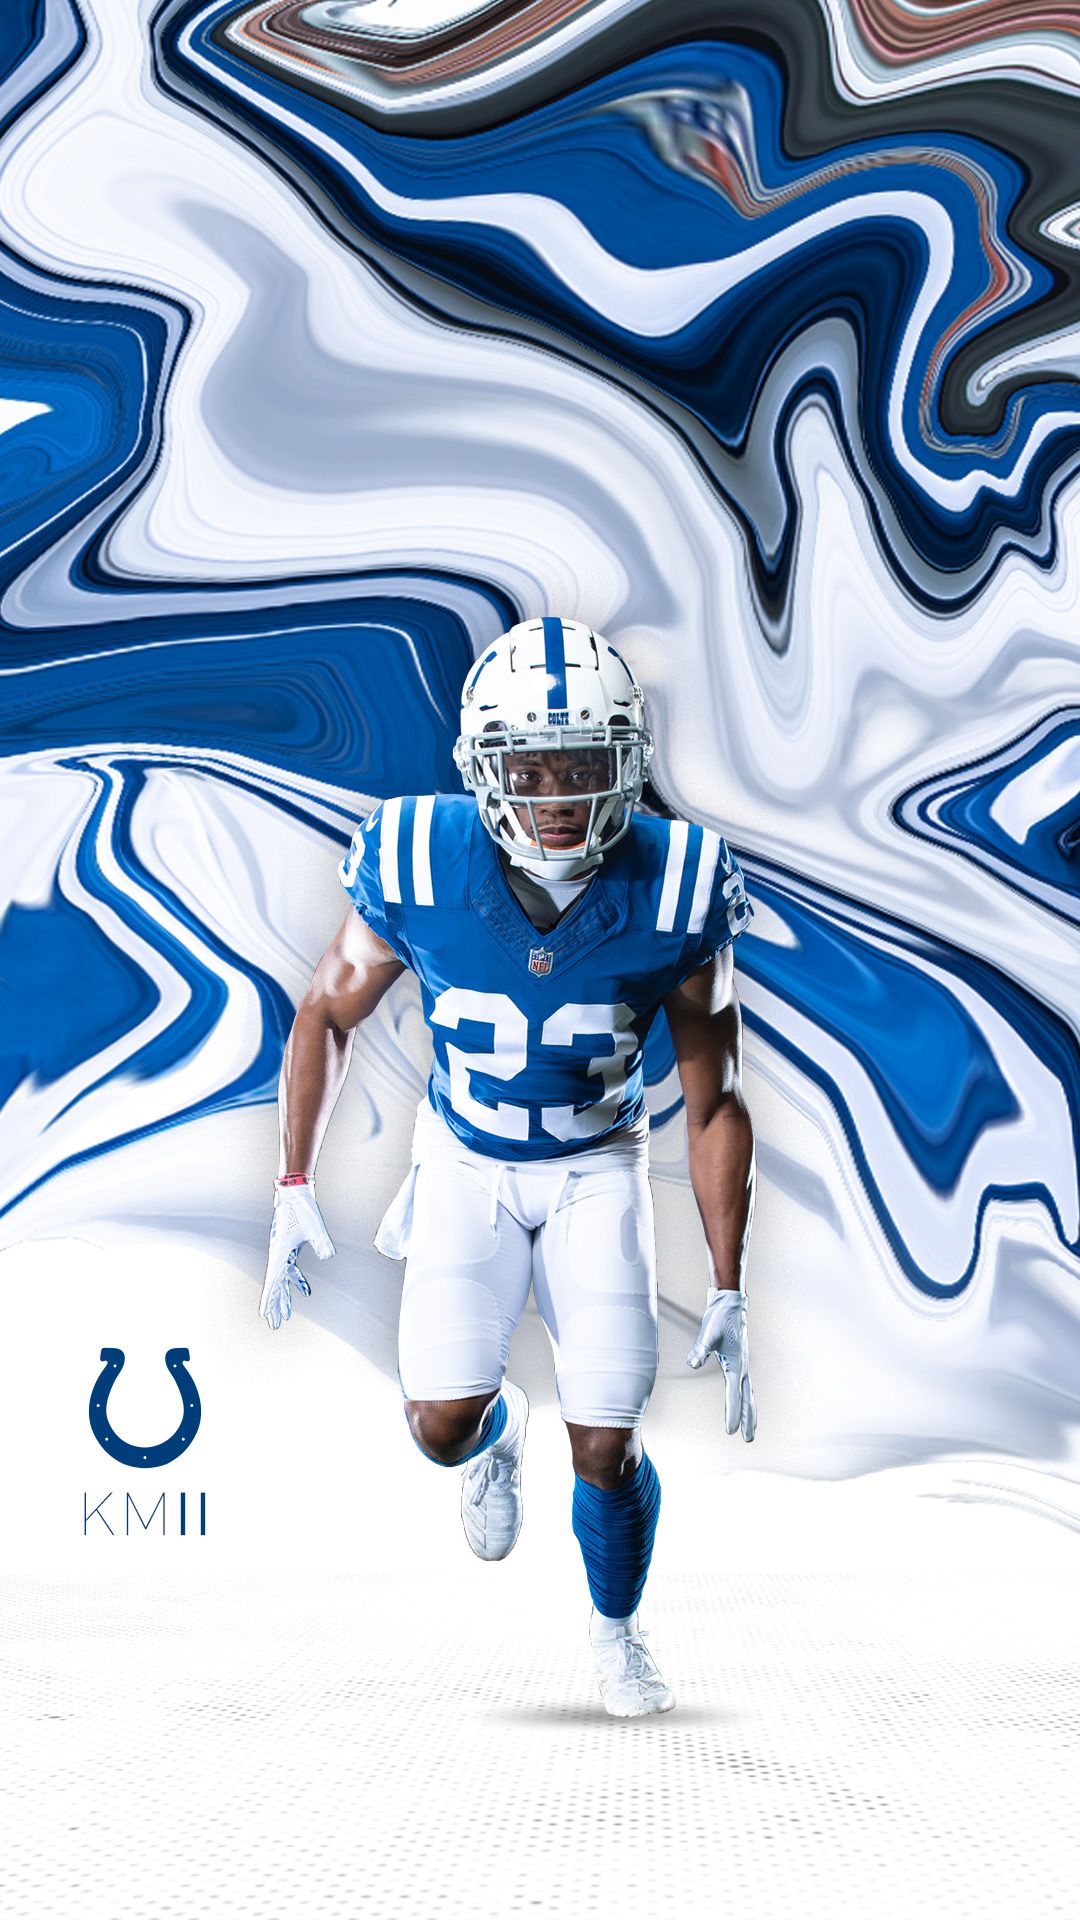 Indianapolis colts wallpapers on behance indianapolis colts indianapolis colts logo nfl football wallpaper